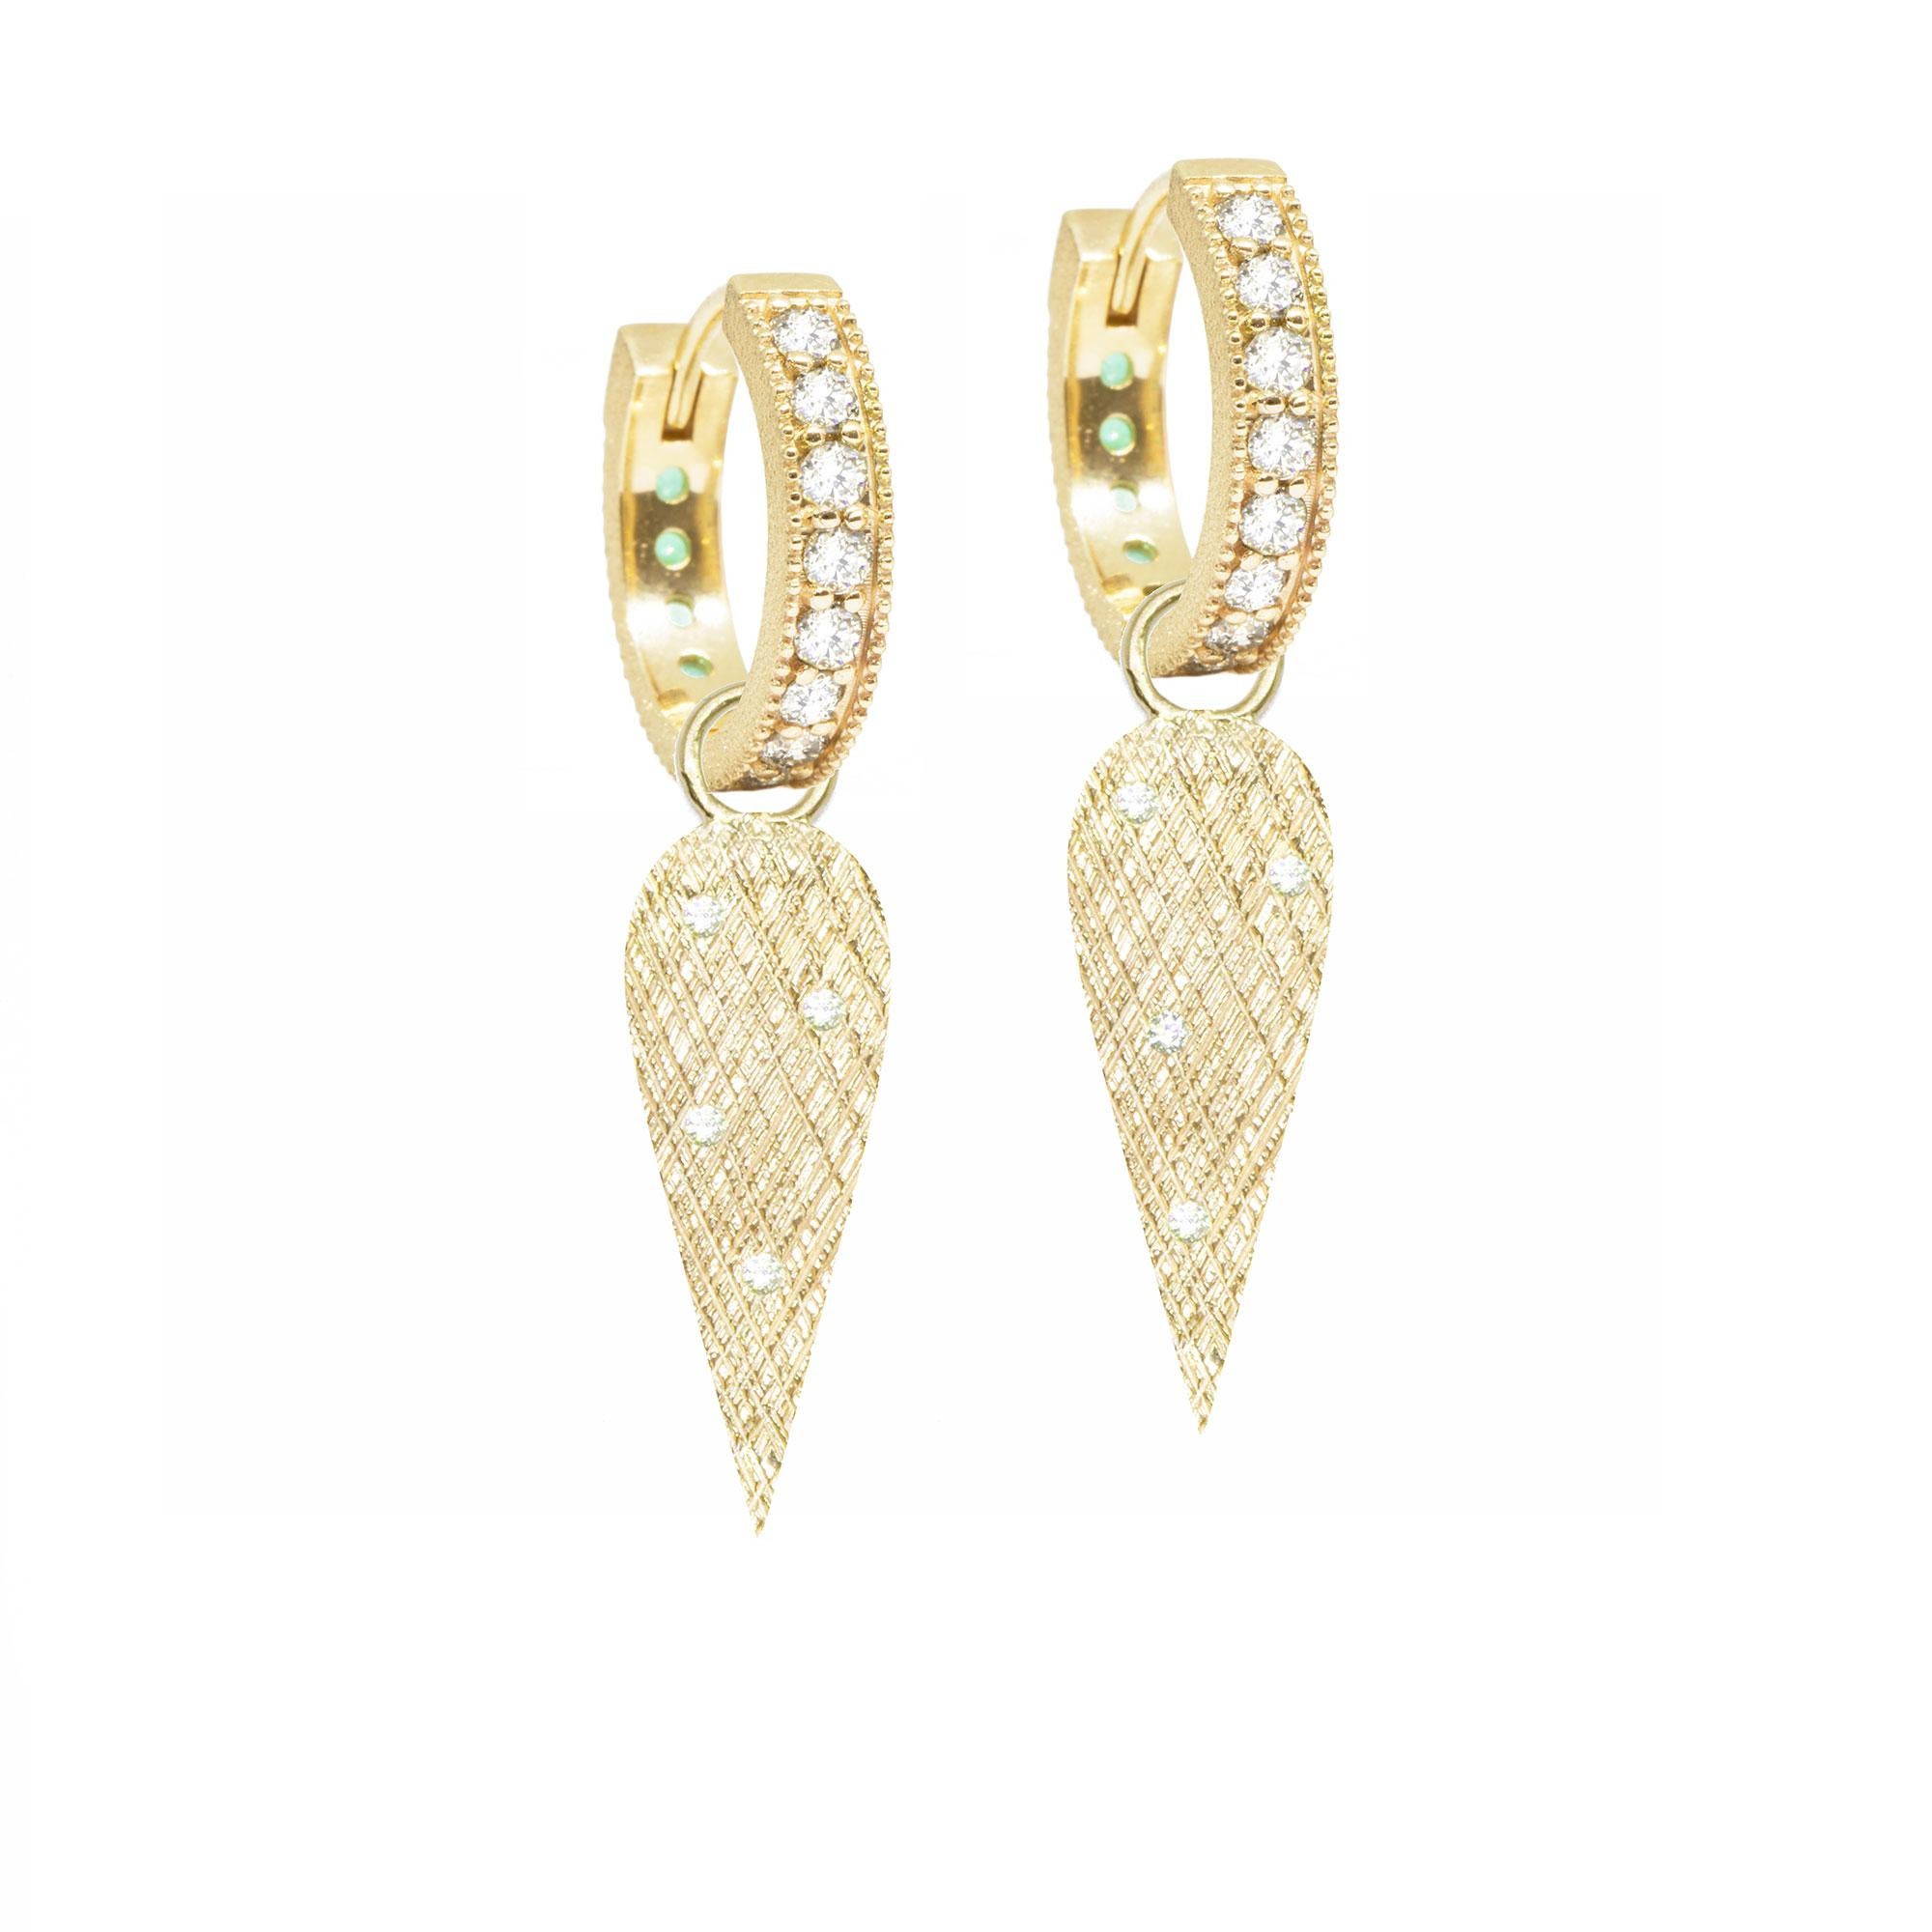 The perfect everyday style, especially when you want a subtle pop of color, the Angel Wings 20mm Gold Charms scatter diamonds on a rich gold background detailed with a feather-like crosshatch pattern.

Nina Nguyen Design's patent-pending earrings